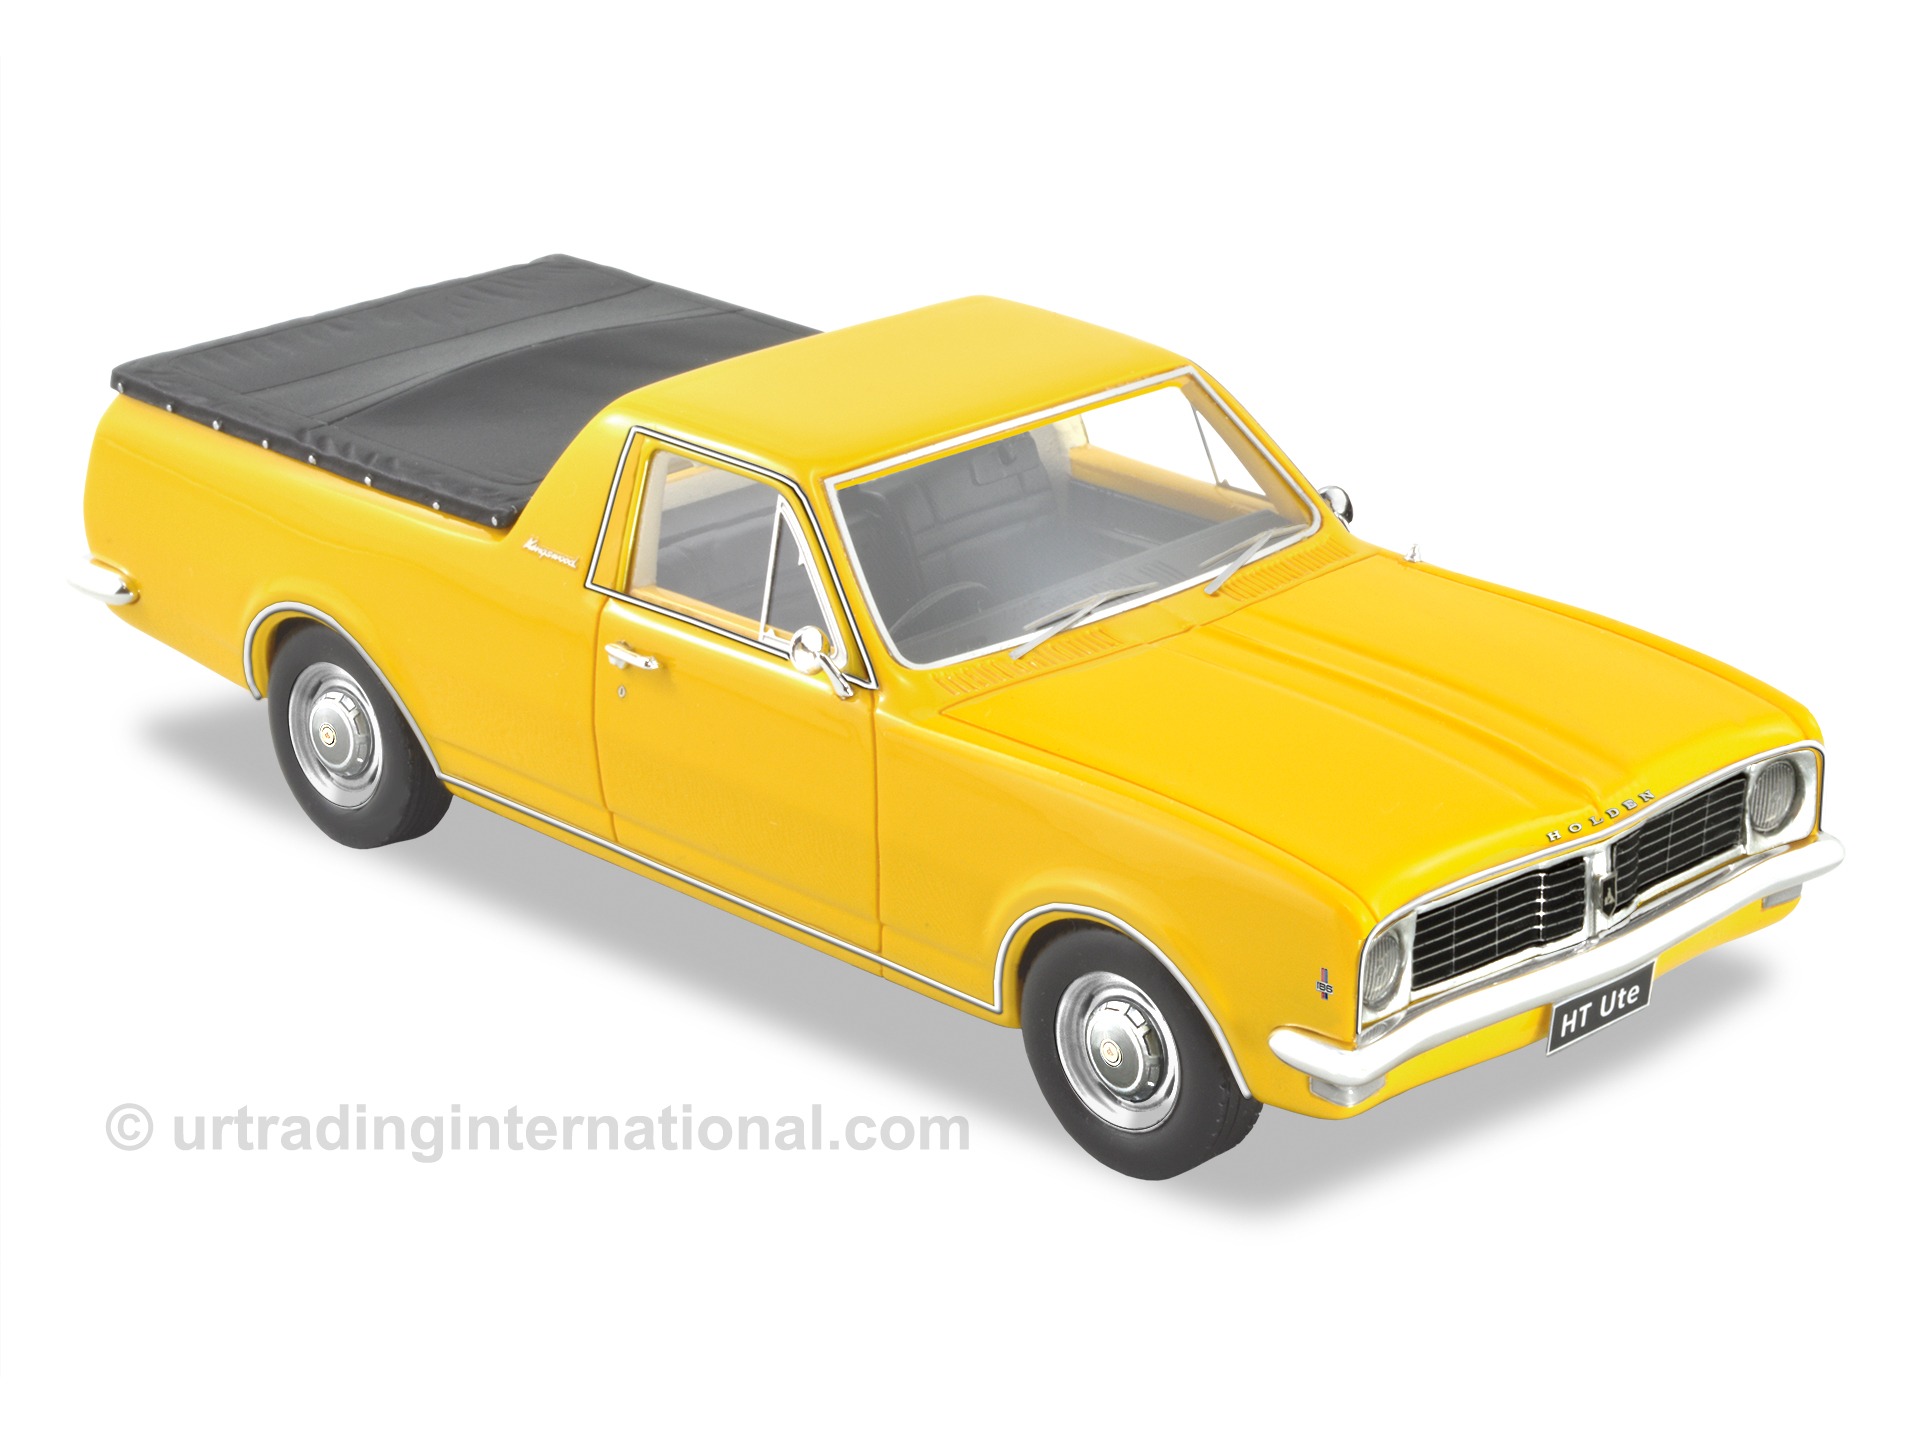 1969-70 HT Kingswood Ute – Yellow Dolly